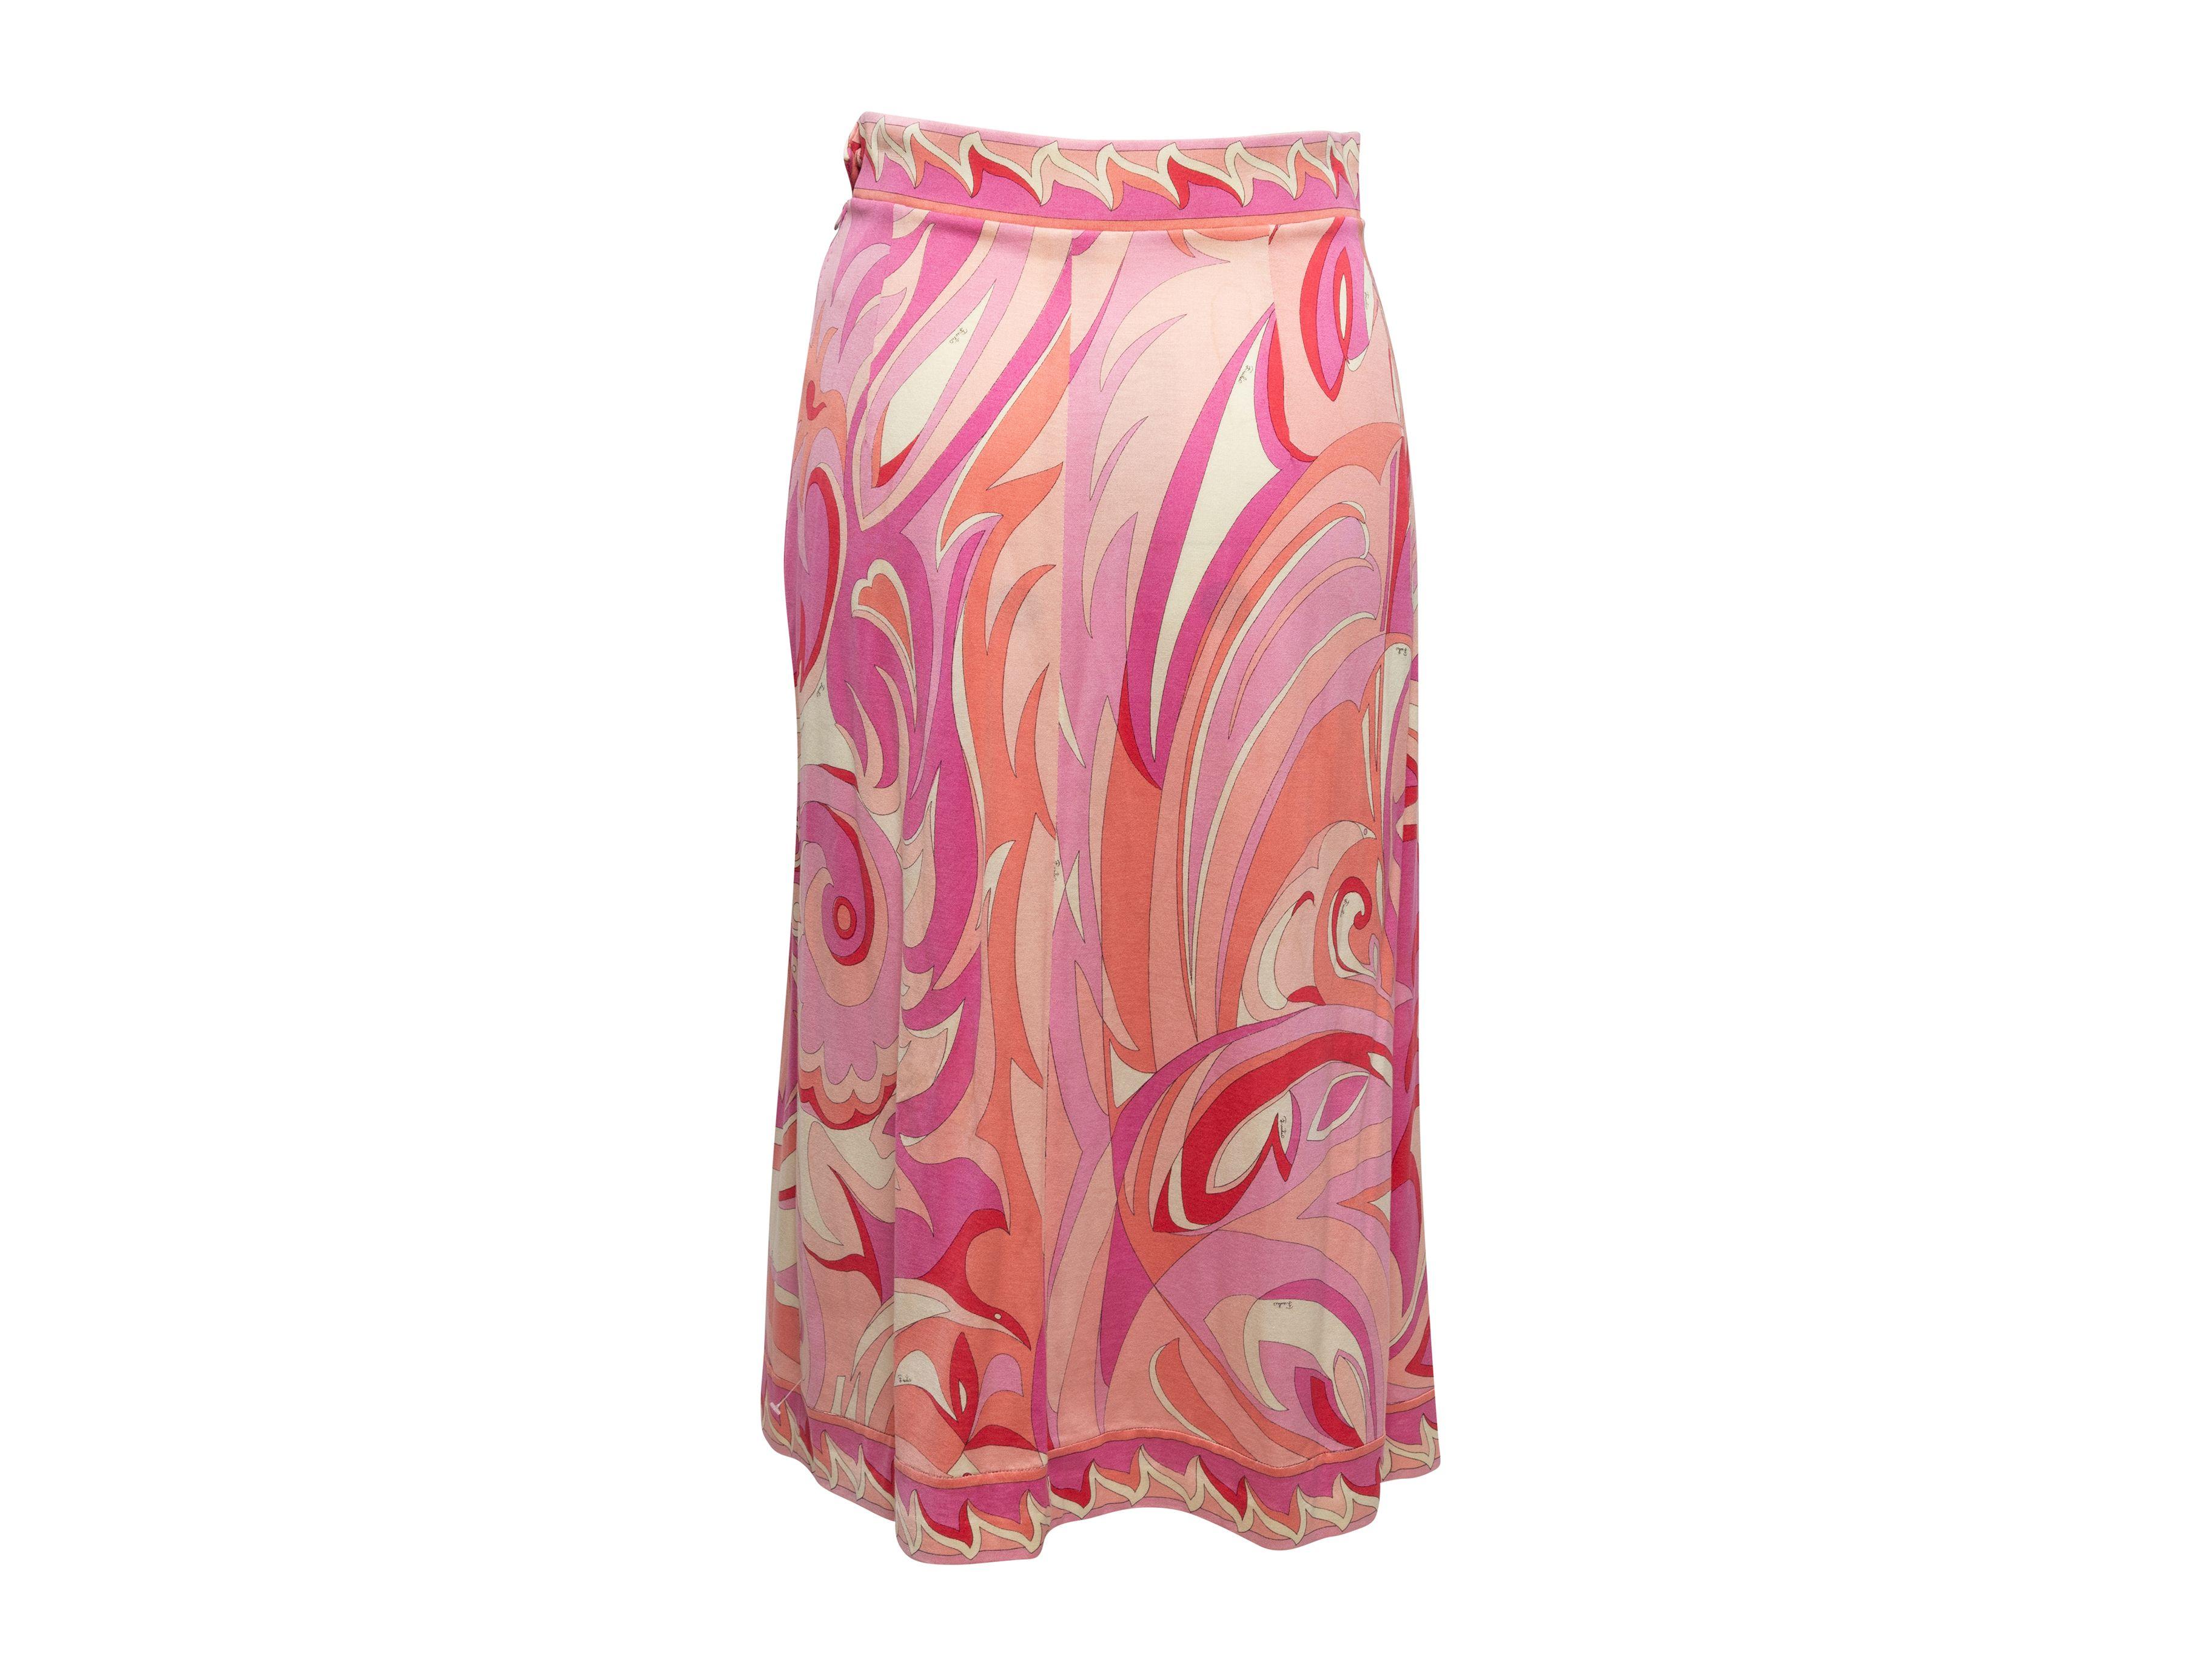 Emilio Pucci Pink & White 60s Abstract Print Pleated Skirt 1